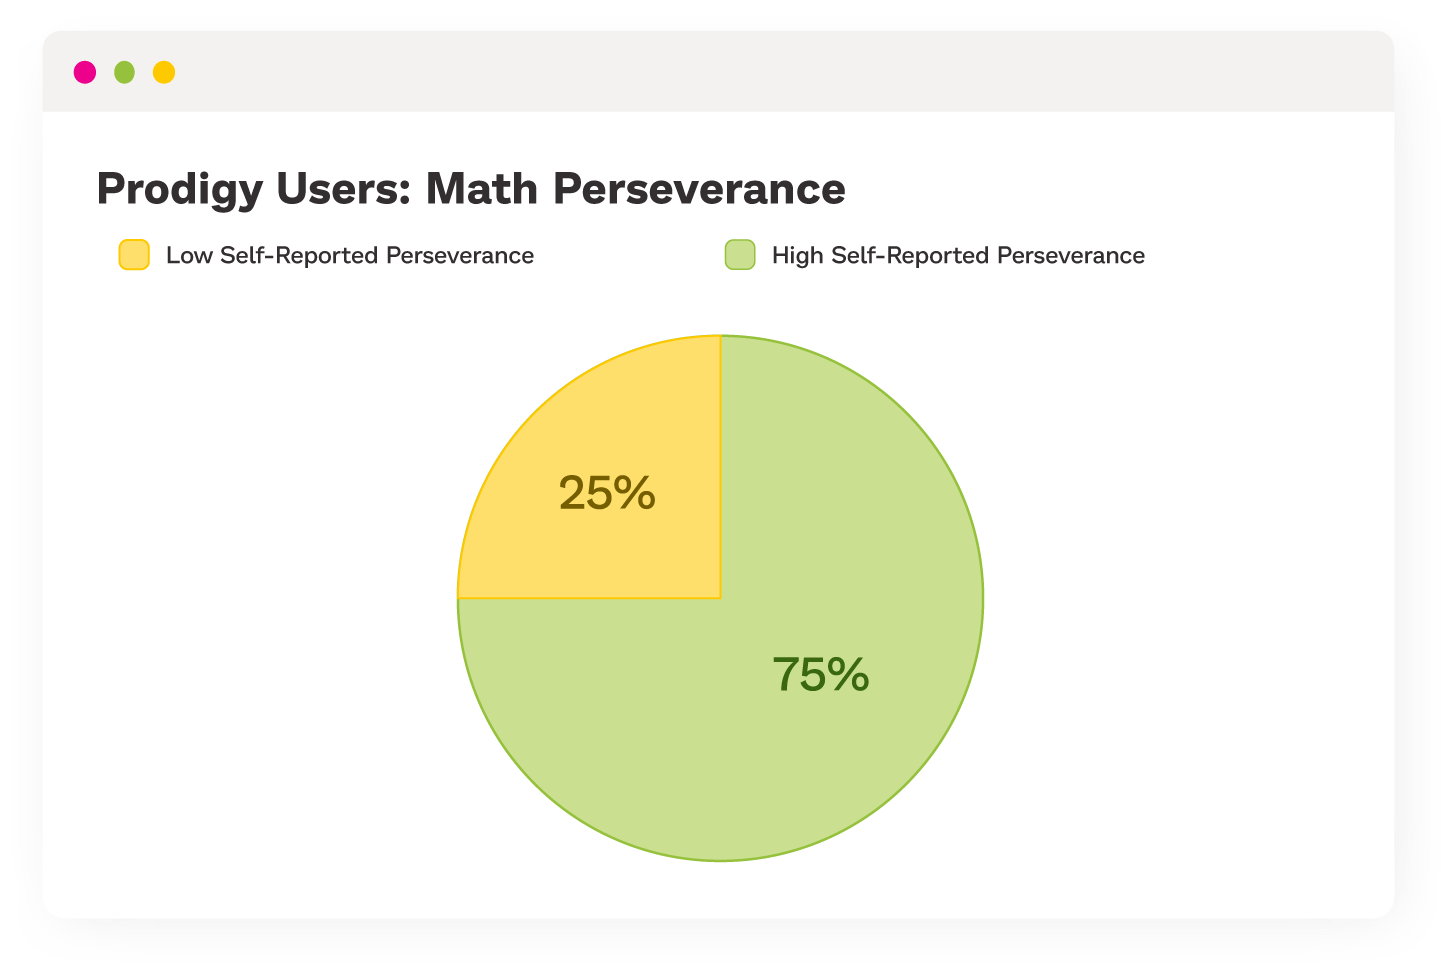 Pie chart showing that 75% of Prodigy users self-reported high math perseverance.